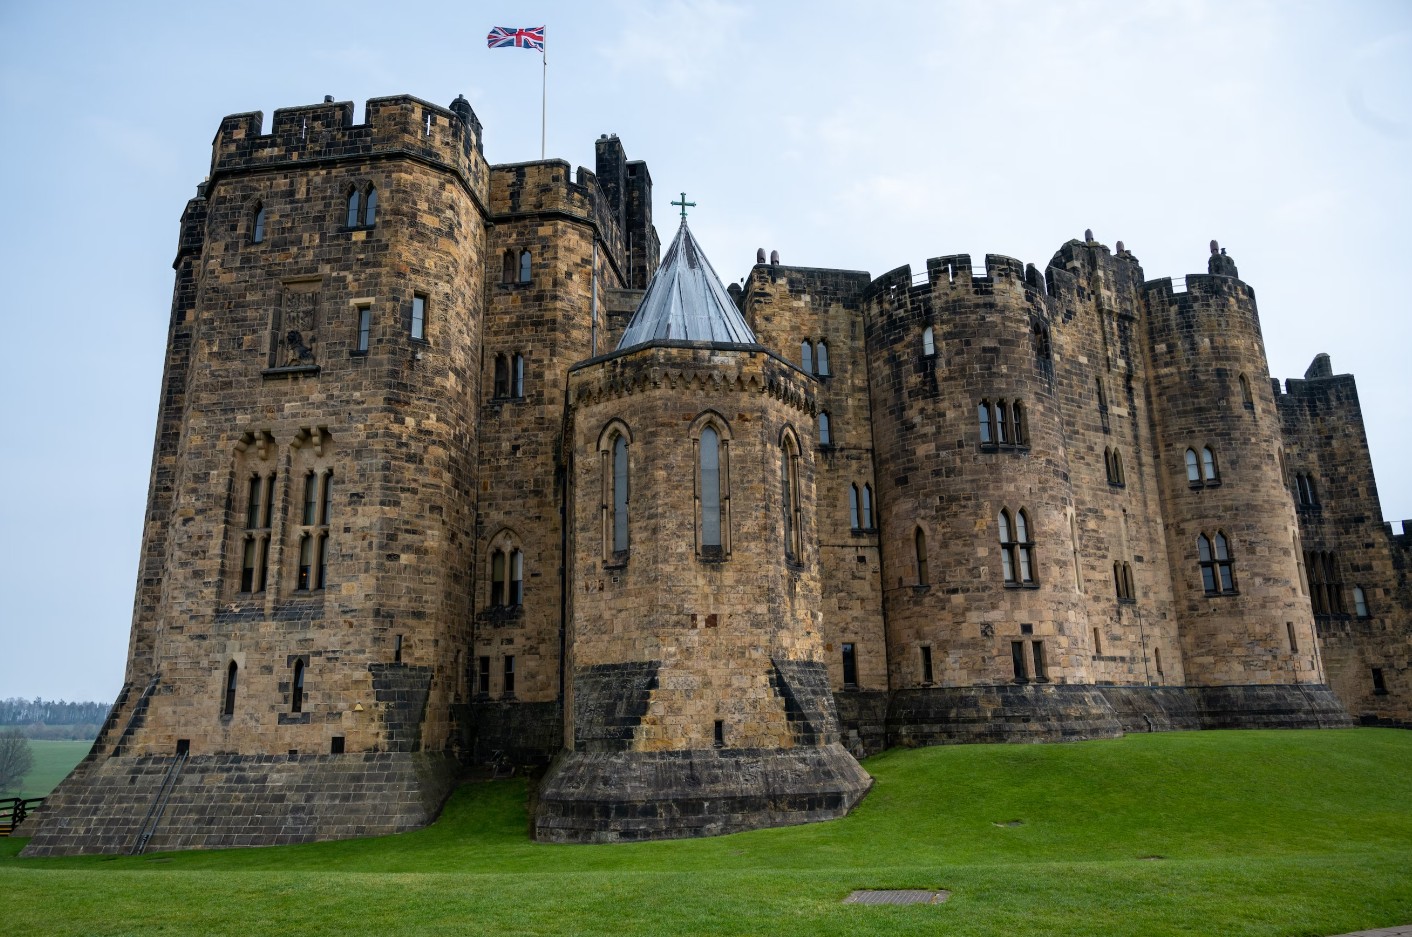 Alnwick Castle - as featured in Harry Potter